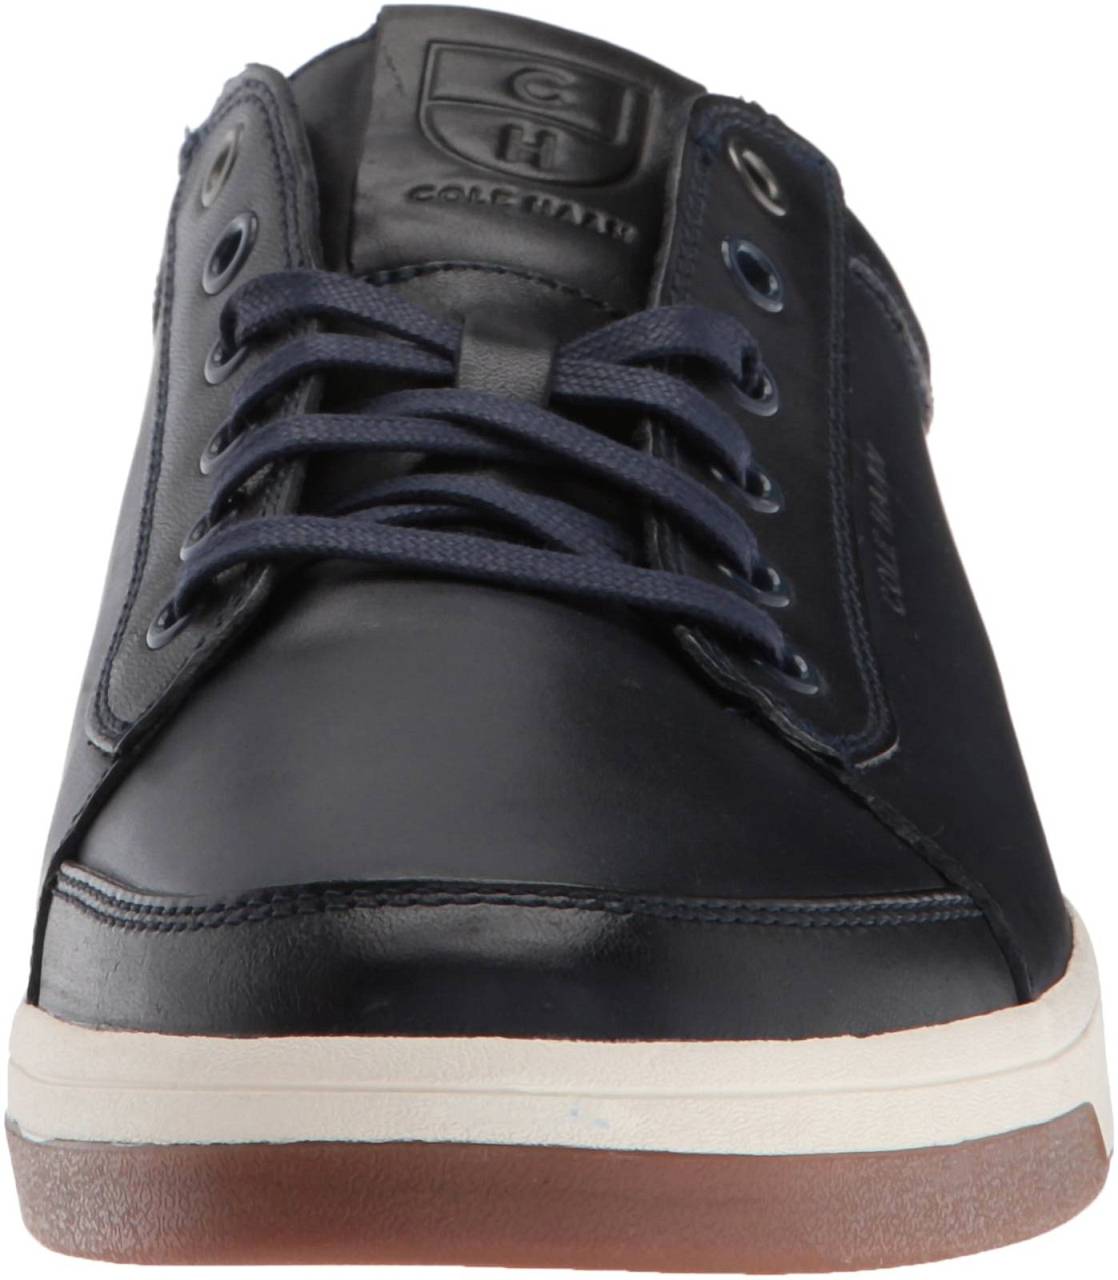 Cole Haan Grandpro Spectator Sneaker – Shoes Reviews & Reasons To Buy